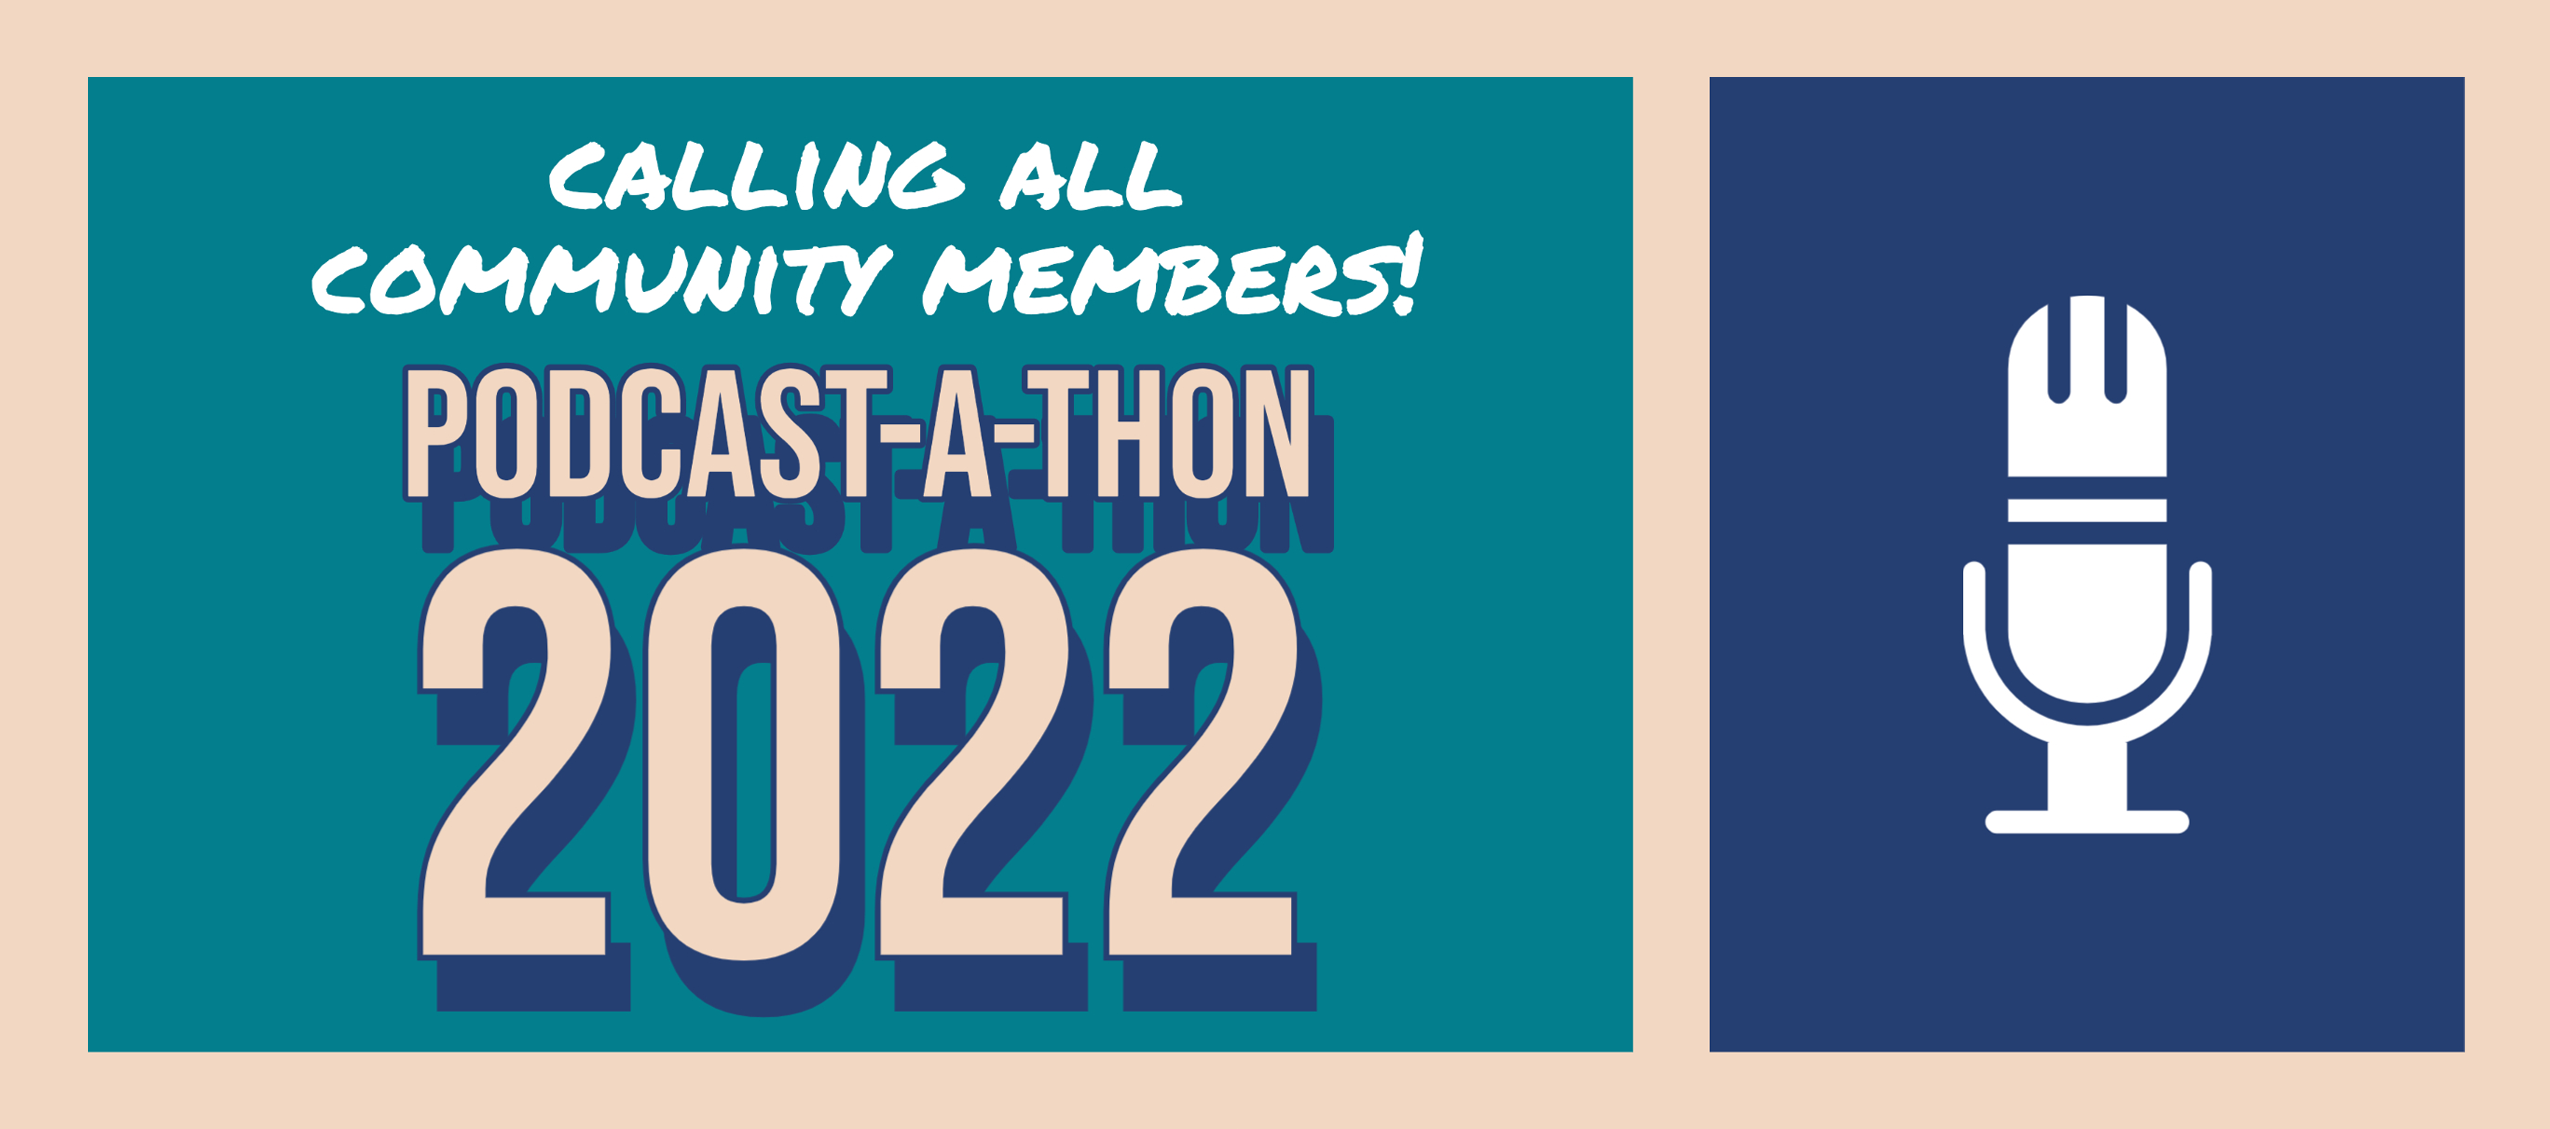 Podcast-a-thon 2022: Calling all community members!